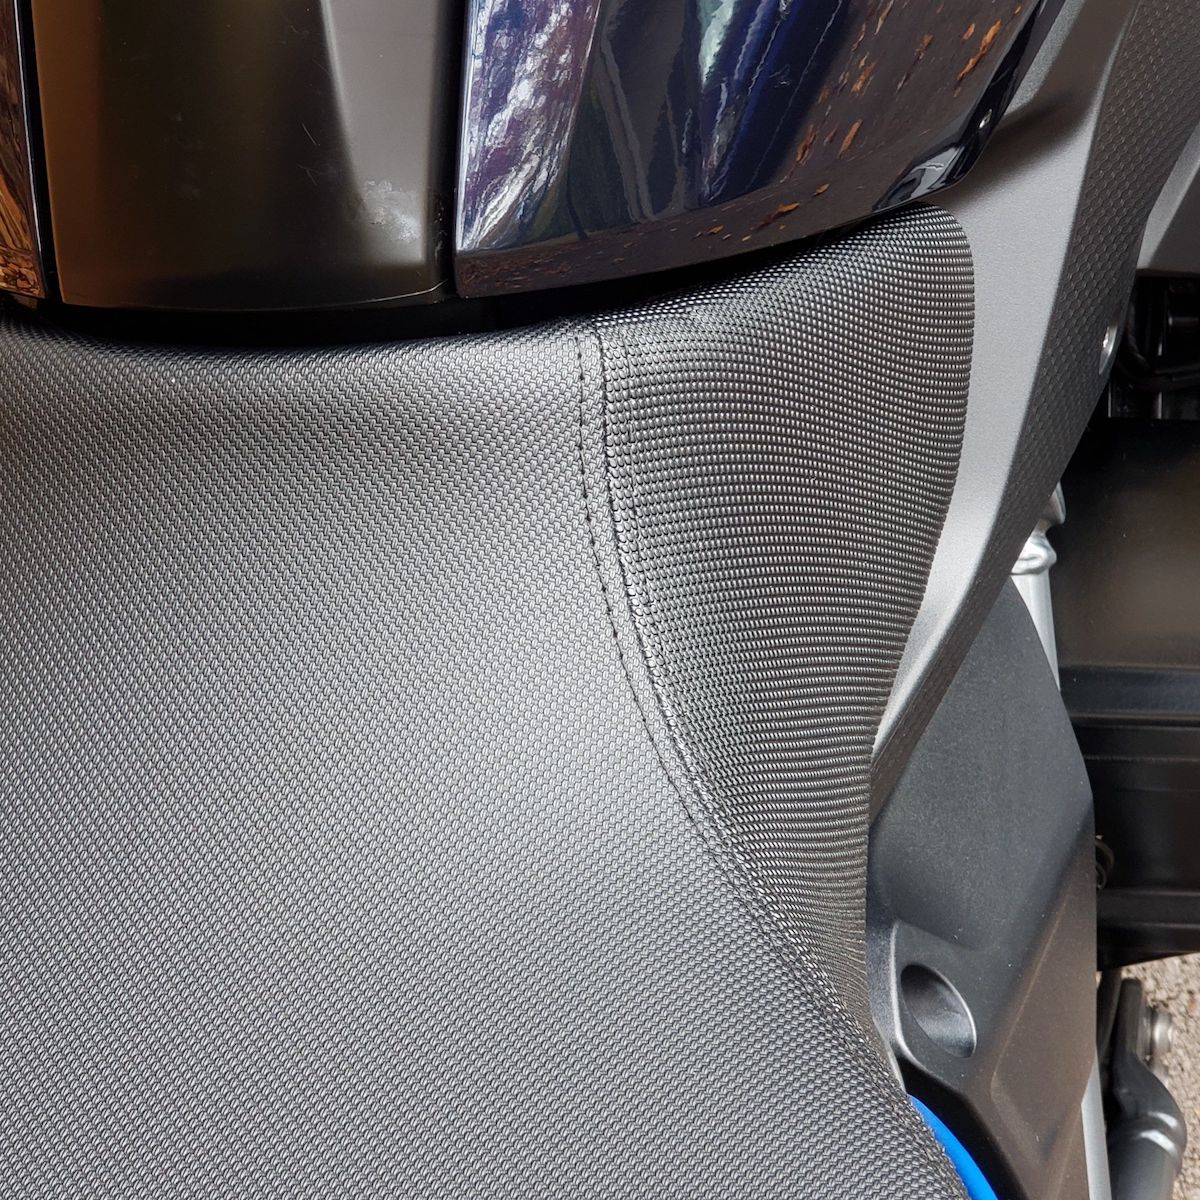 Sargent Cycles Introduces Do It Yourself Heated Motorcycle Seat